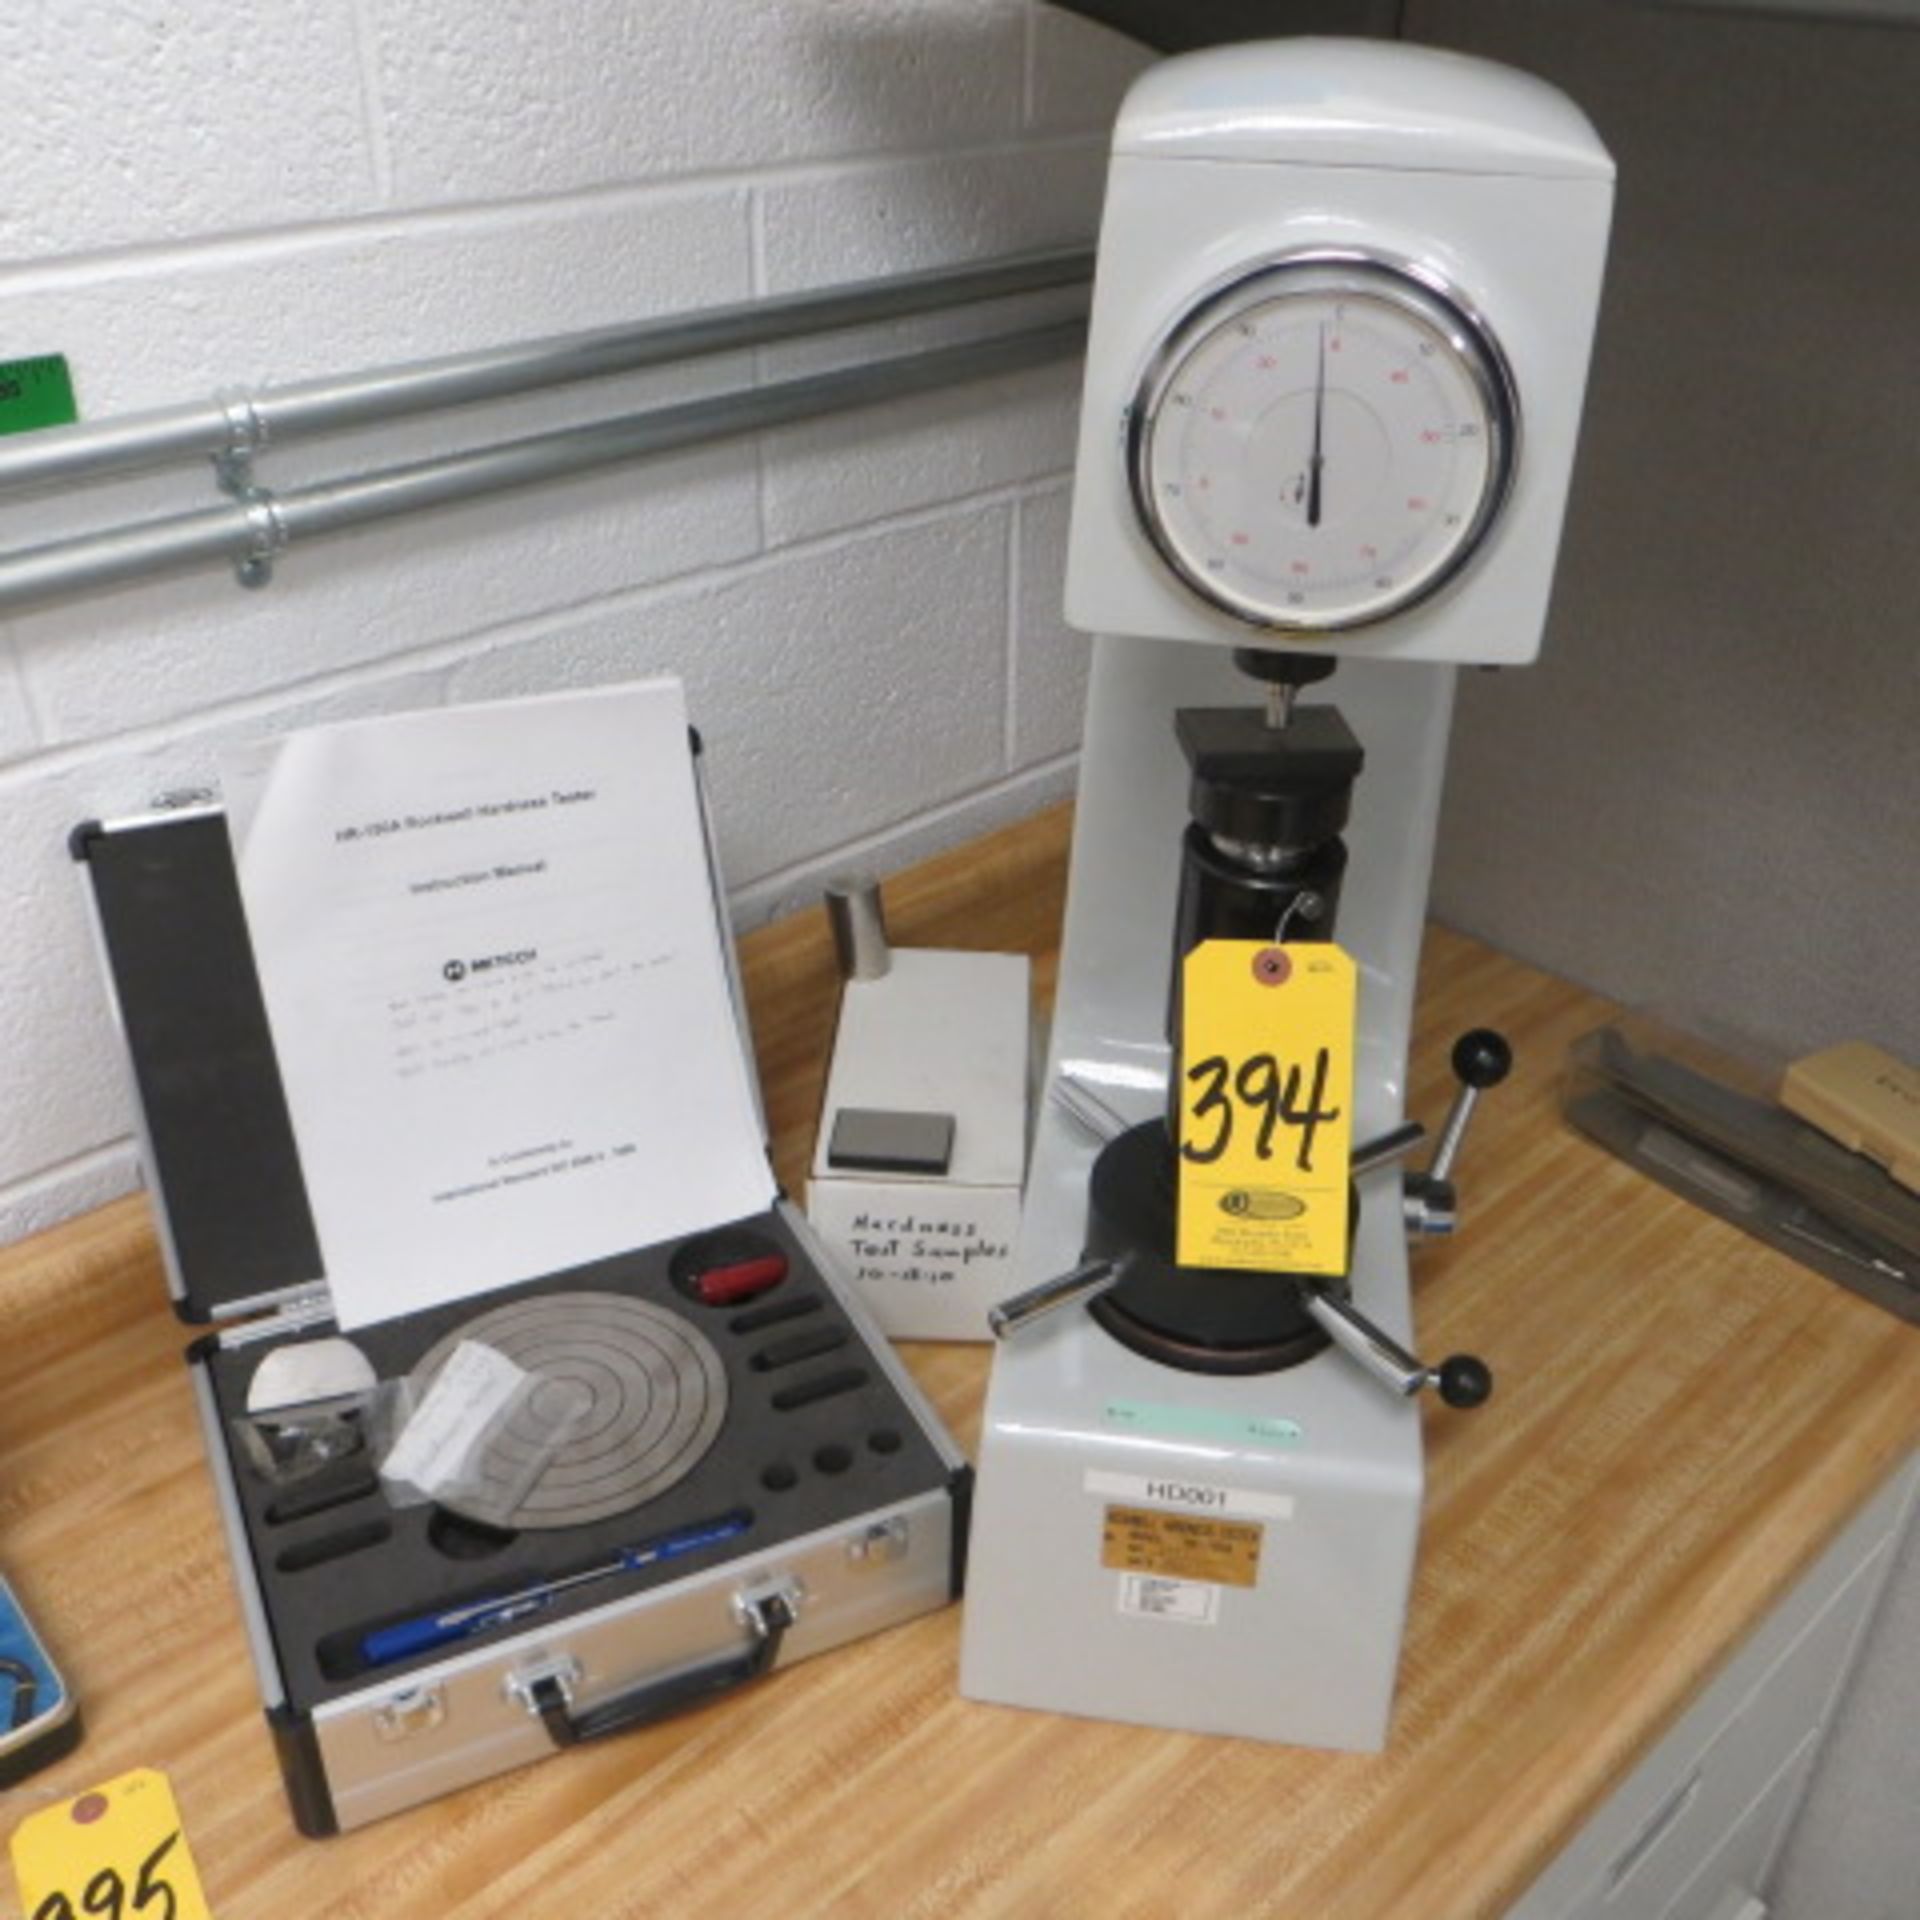 ROCKWELL HR-150A HARDNESS TESTER WITH TEST BLOCK